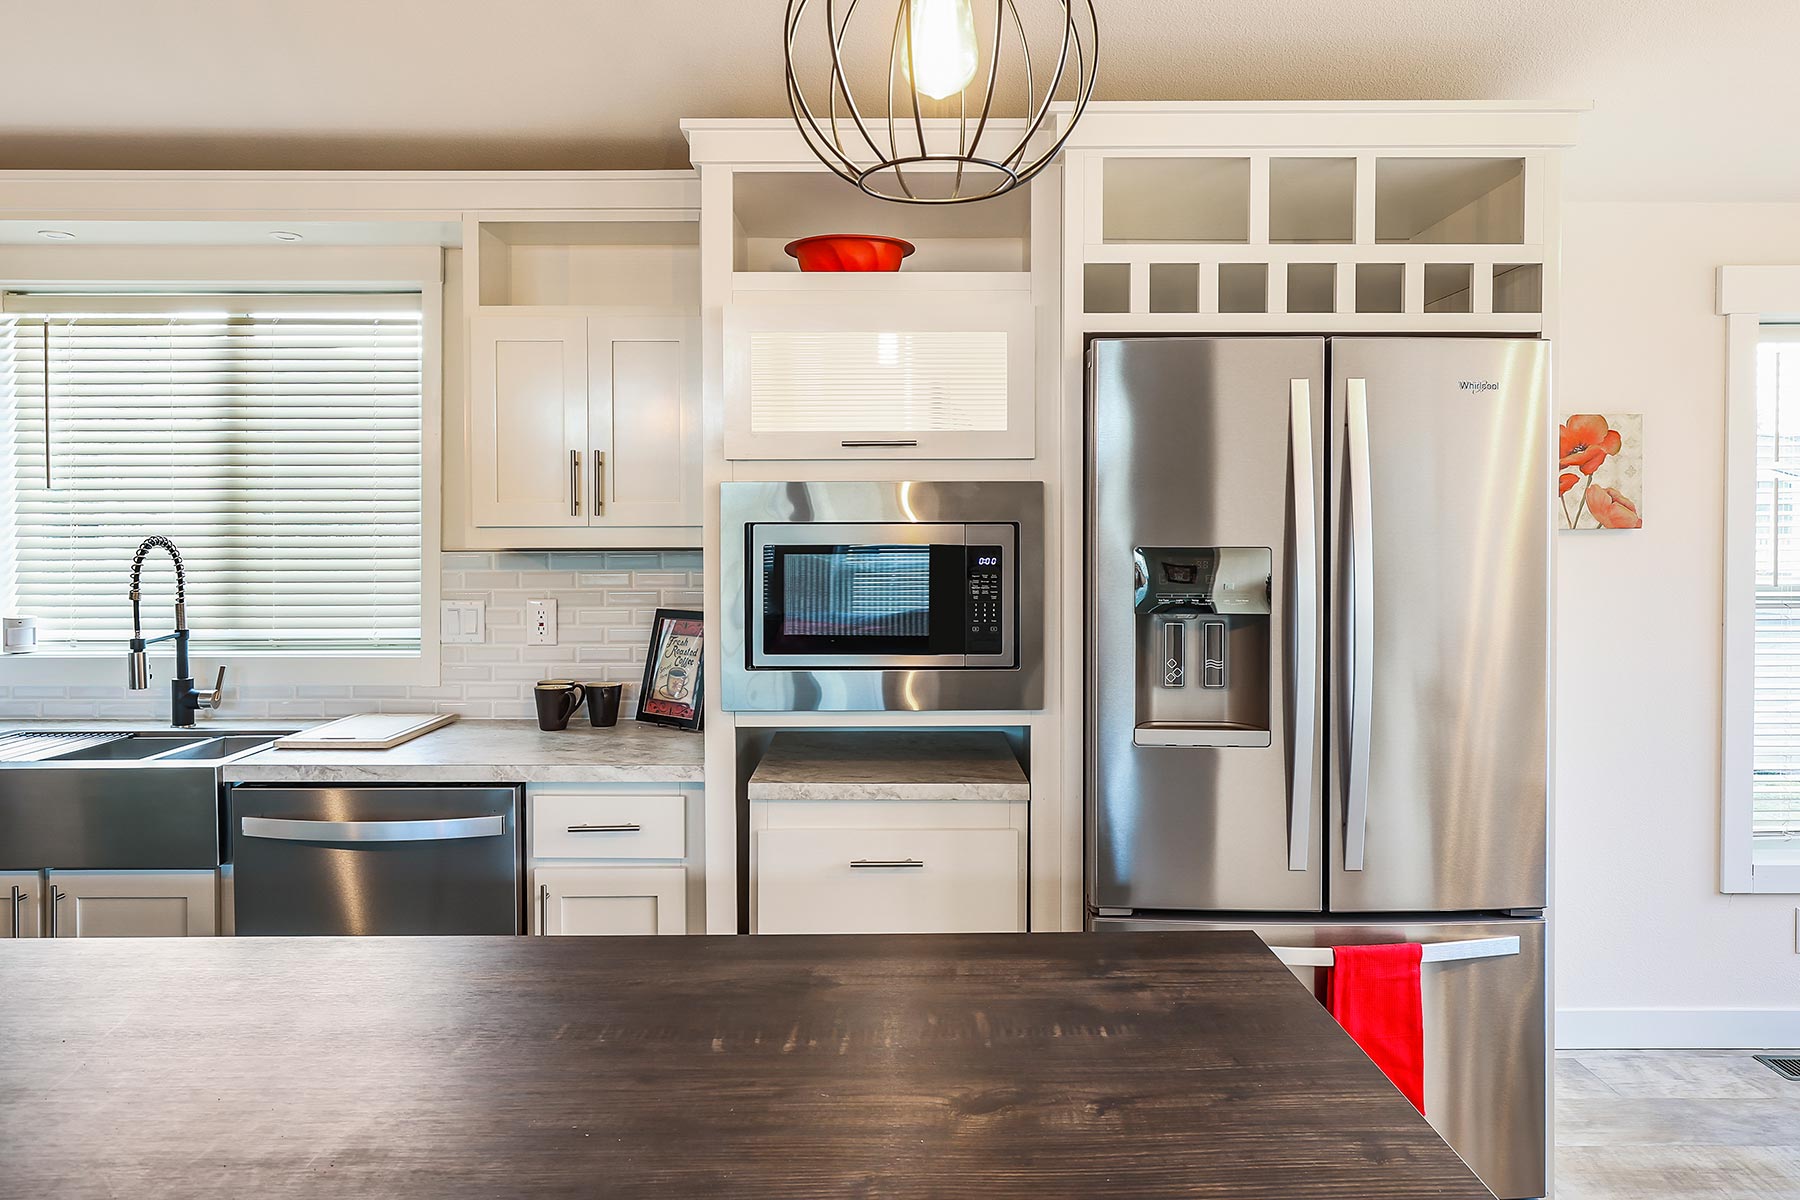 Skyline Homes Westridge 1265CT Manufactured Home Kitchen featuring island, walk-in pantry, appliances, small window